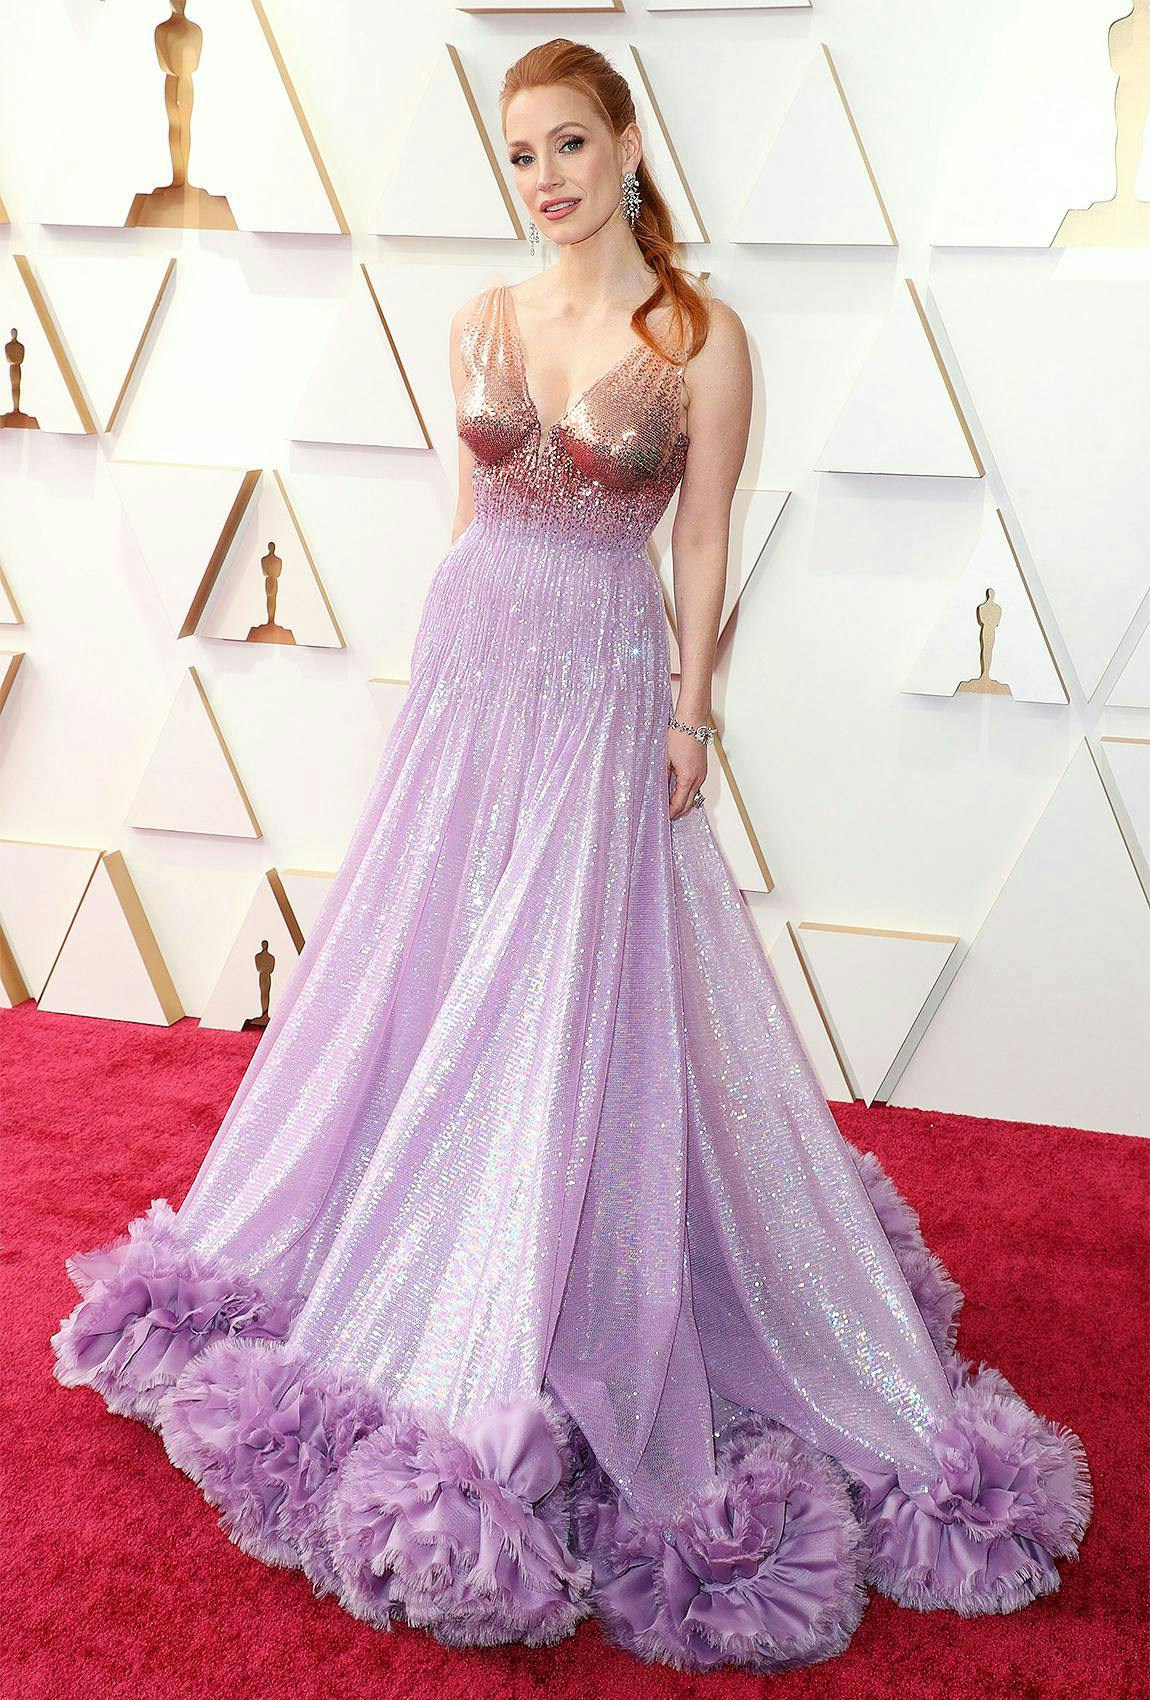 94th annual academy awards arrivals los angeles usa 27 mar 2022 jessica chastain oscar oscars actor female personality 109653390 clothing apparel fashion wedding gown wedding gown robe evening dress person